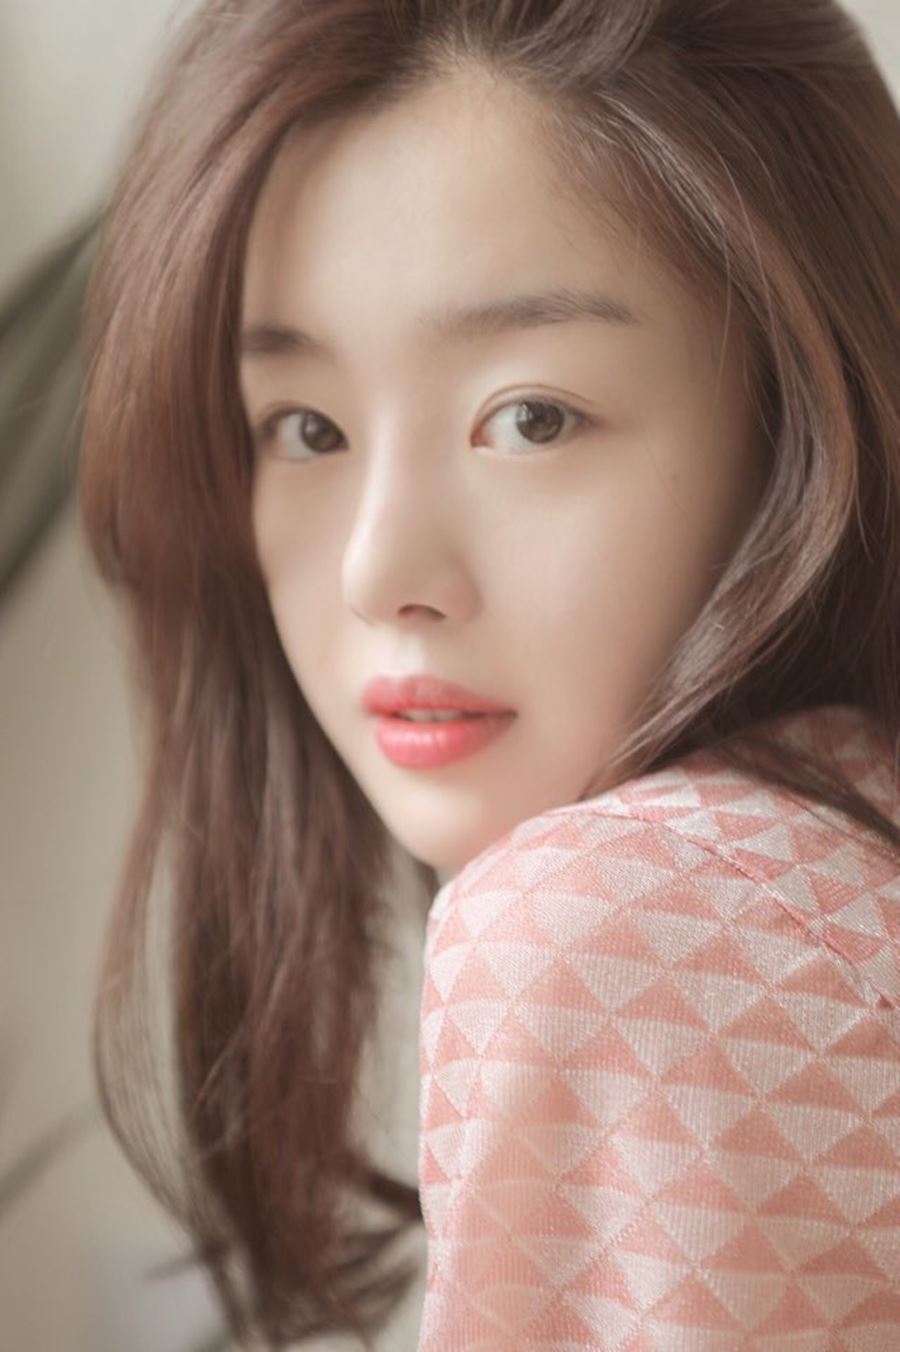 Han Sun-hwa has signed an Exclusive contract with Keyeast Entertainment.Hong Min-ki, vice president of Keyeast Entertainment Management, announced on March 13 that he will actively support Han Sun-hwa to spread the wide spectrum of acting with the colorful charm of Han Sun-hwa.Han Sun-hwa, who made his debut as a member of the girl group The Secret in 2009, was loved by hits such as Magic, Madonna, Love is Move and Starlight Moonlight.He also played an active role in entertainment programs such as KBS2 Youth Unfortunate and MBC We Got Married with pleasant and hairy charm.Keyeast Entertainment, which Han Sun-hwa signed an exclusive contract, belonged to Son Hyun-joo Ju Ji-hoon Jung Ryeo-won Kim Dong-wook Soi Hyun Ingyojin Park Hae-sun and Jung Eun-chae.He also produced dramas such as OCN Voice series, SBS Hiena and Netflix original Health Teacher Ahn Eun Young.=